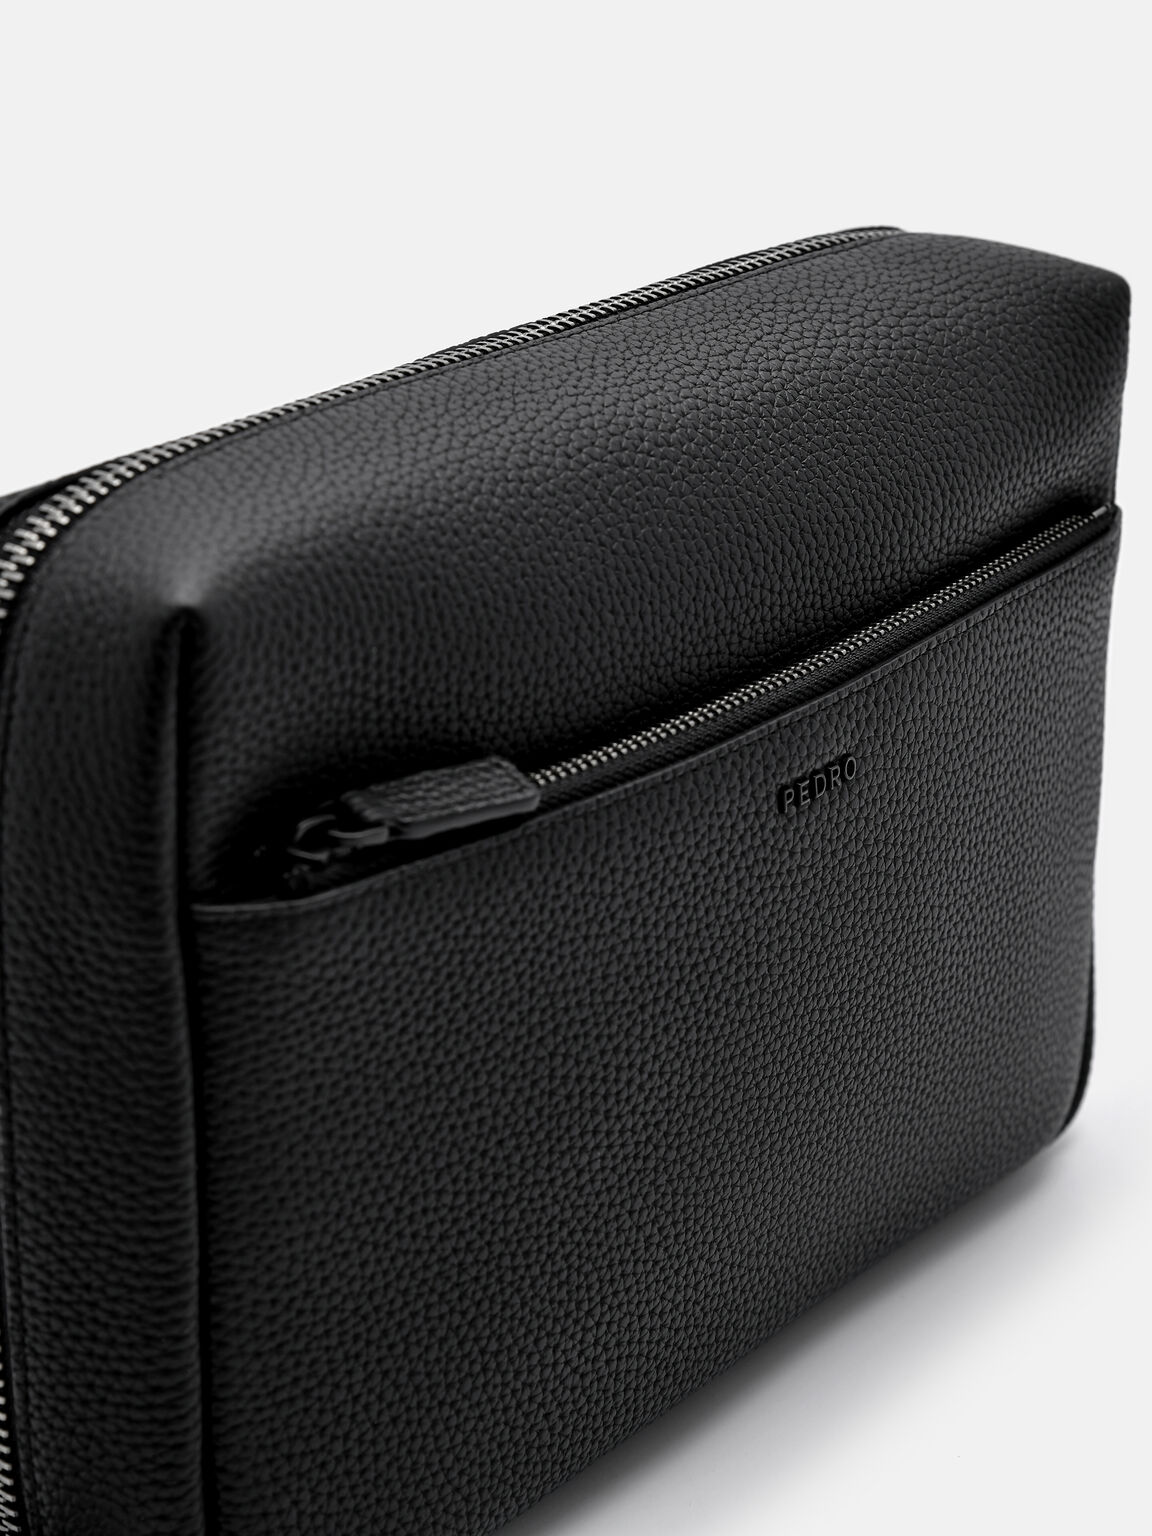 Embossed Leather Pouch, Black